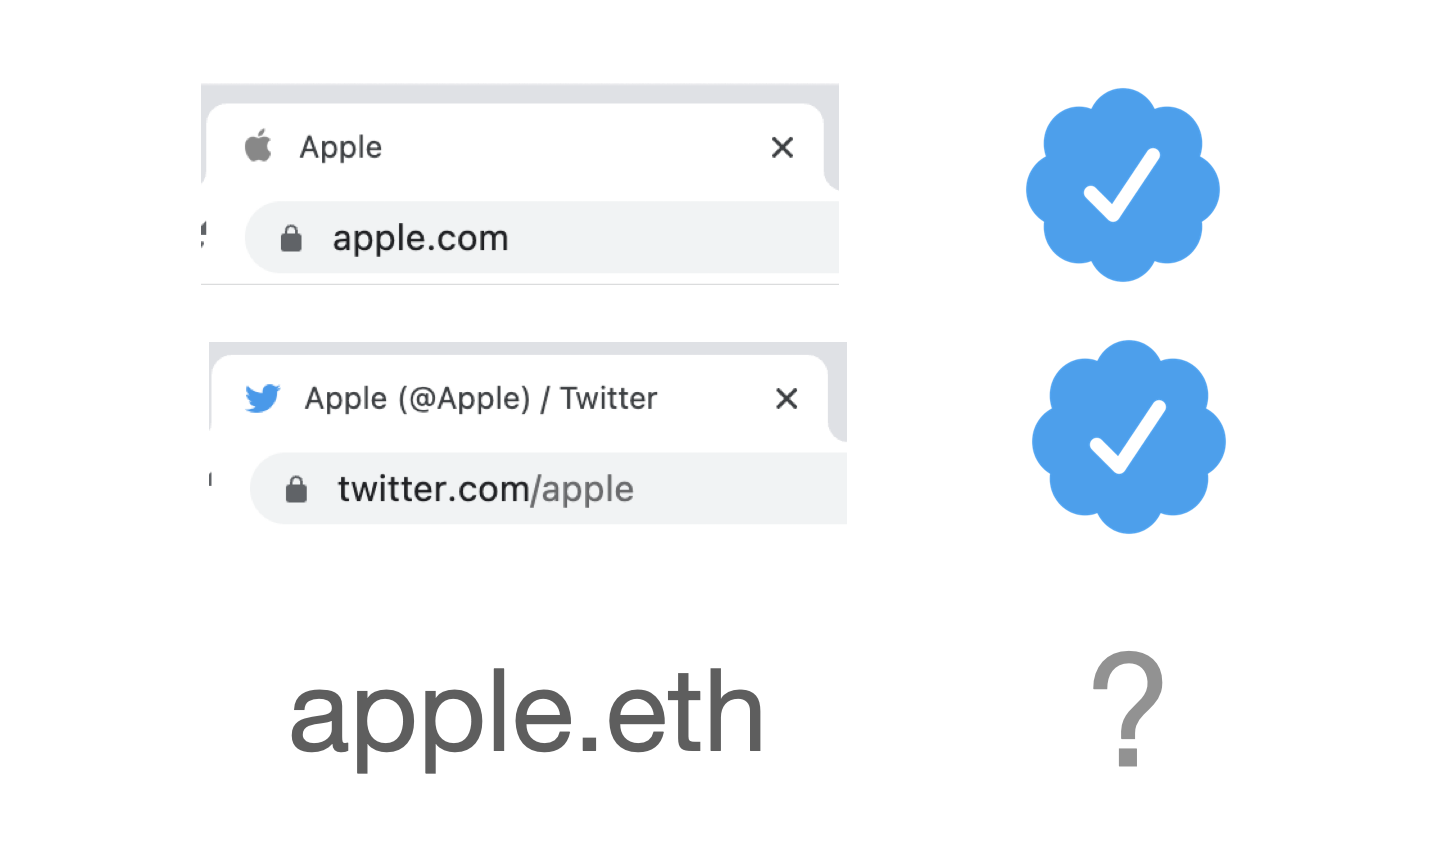 Apple webiste and social media accounts are more reliable than apple.eth